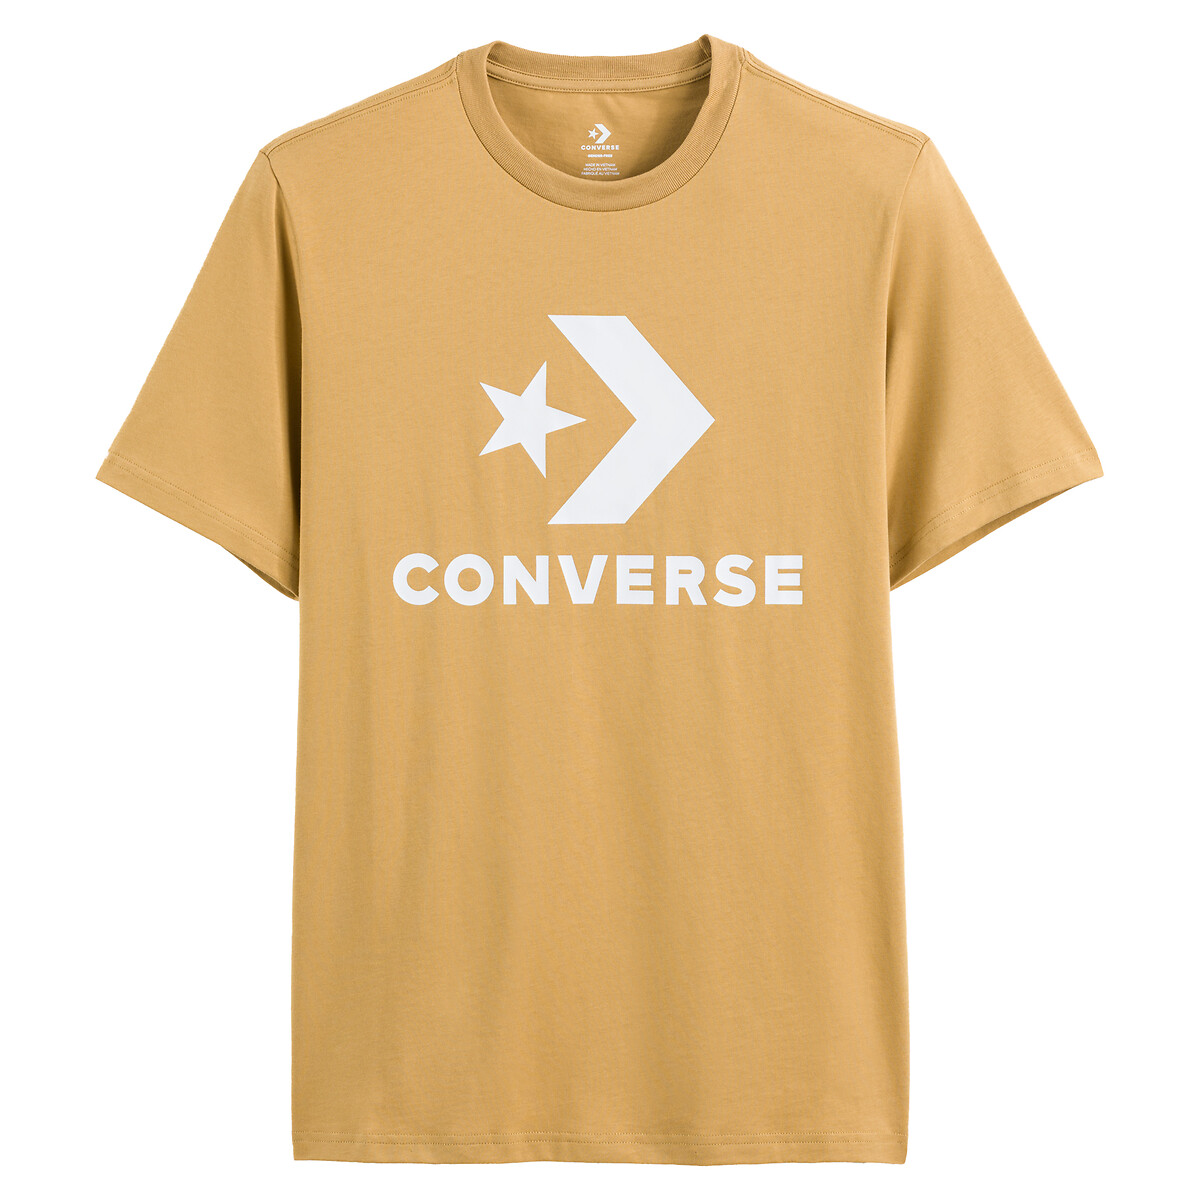 Image of Large Star Chevron T-Shirt in Cotton with Short Sleeves